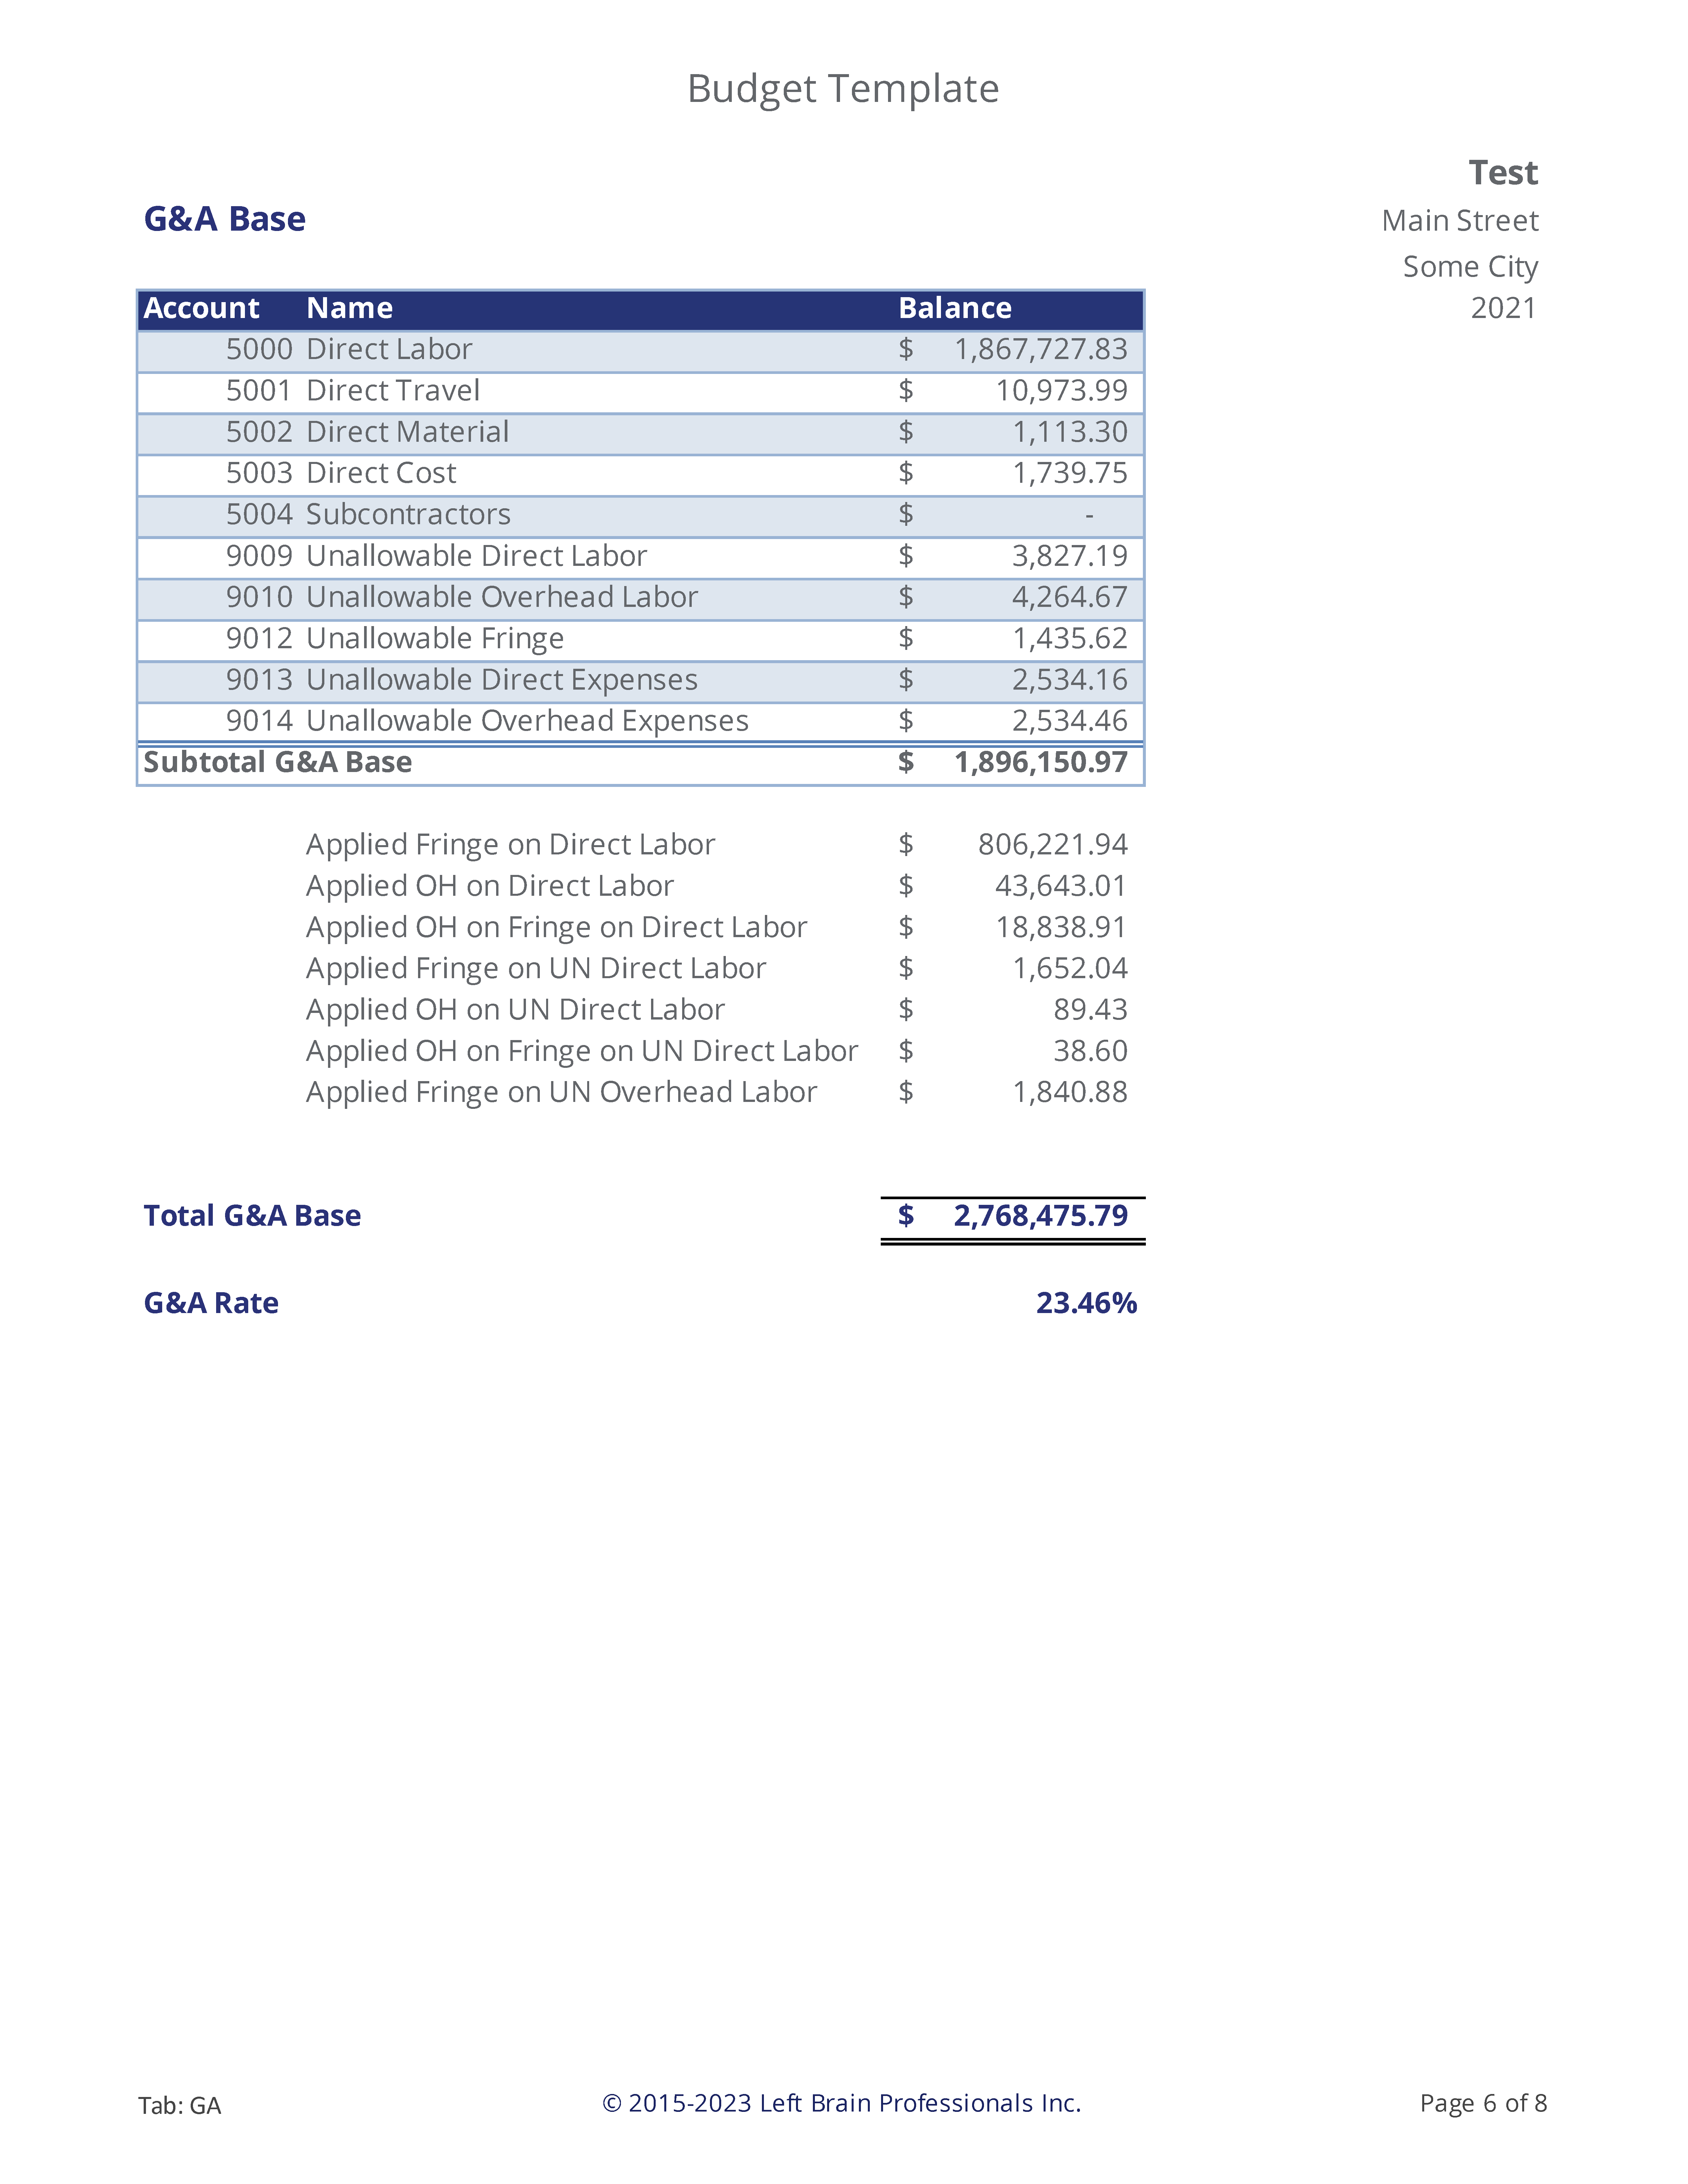 Budget Page 6